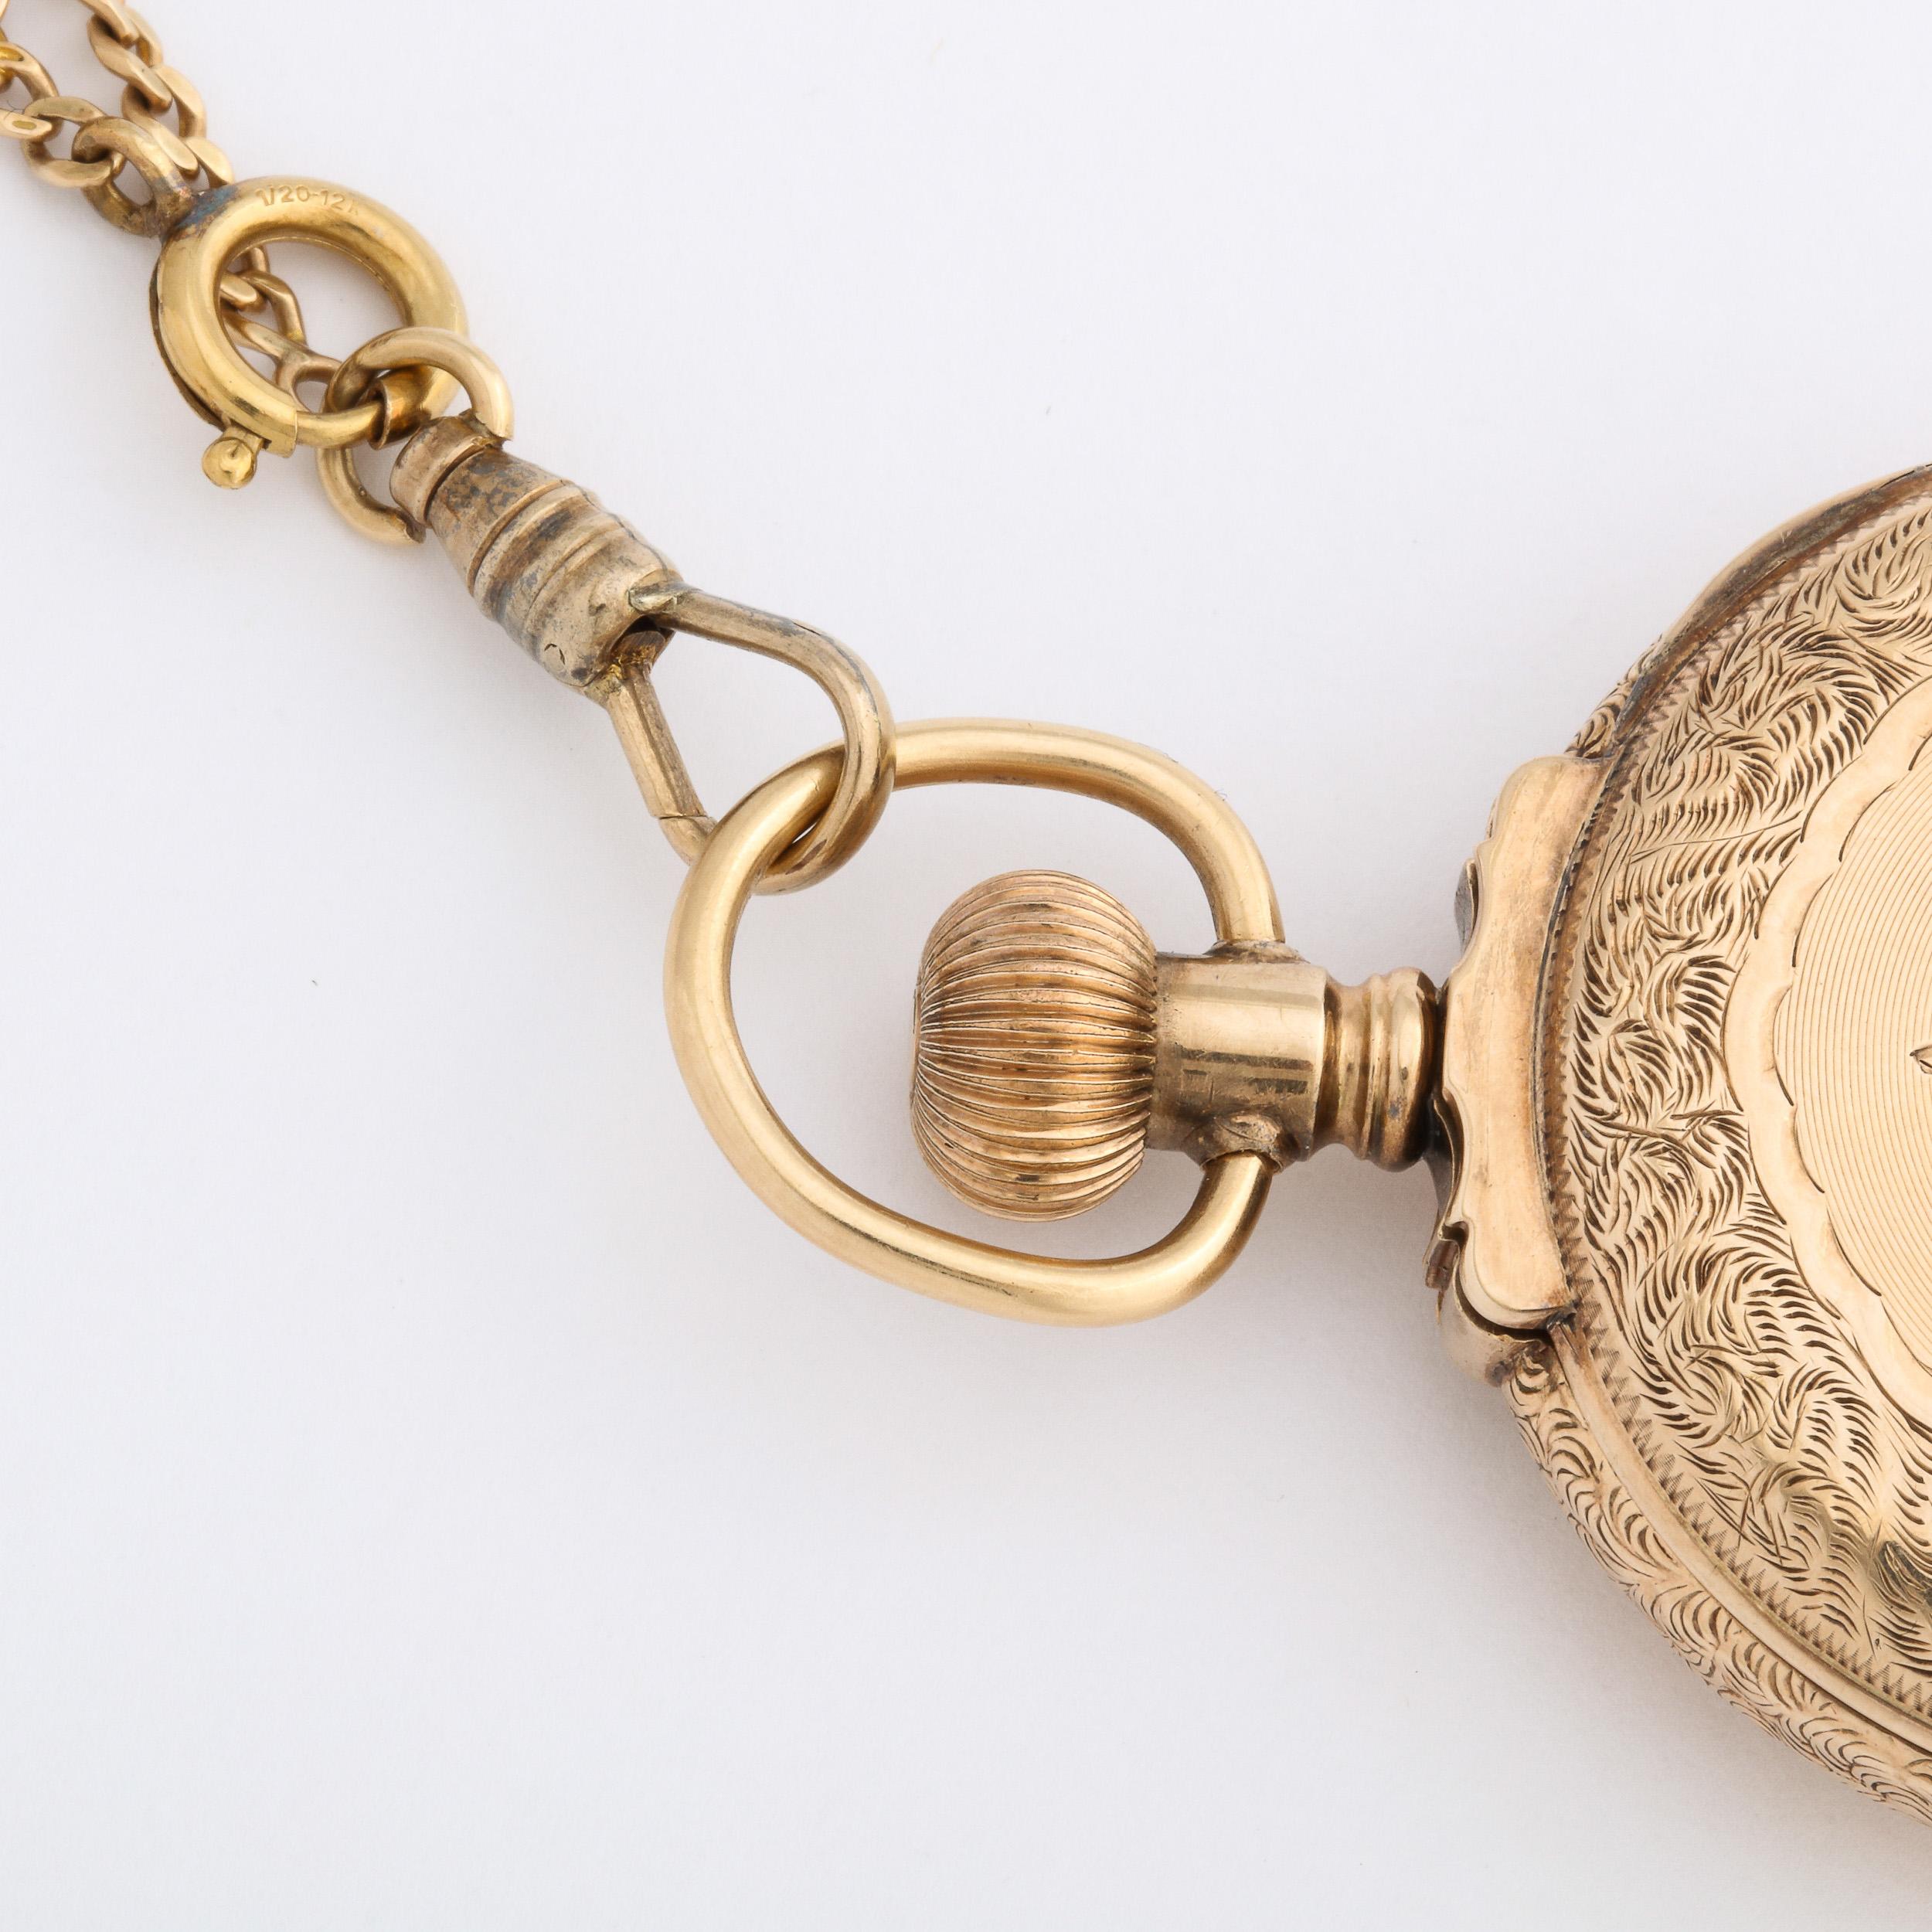 Antique 14K Yellow Gold Lady's Hunting Watch W/ Chain  by Waltham Watch Co. 1888 In Excellent Condition For Sale In New York, NY